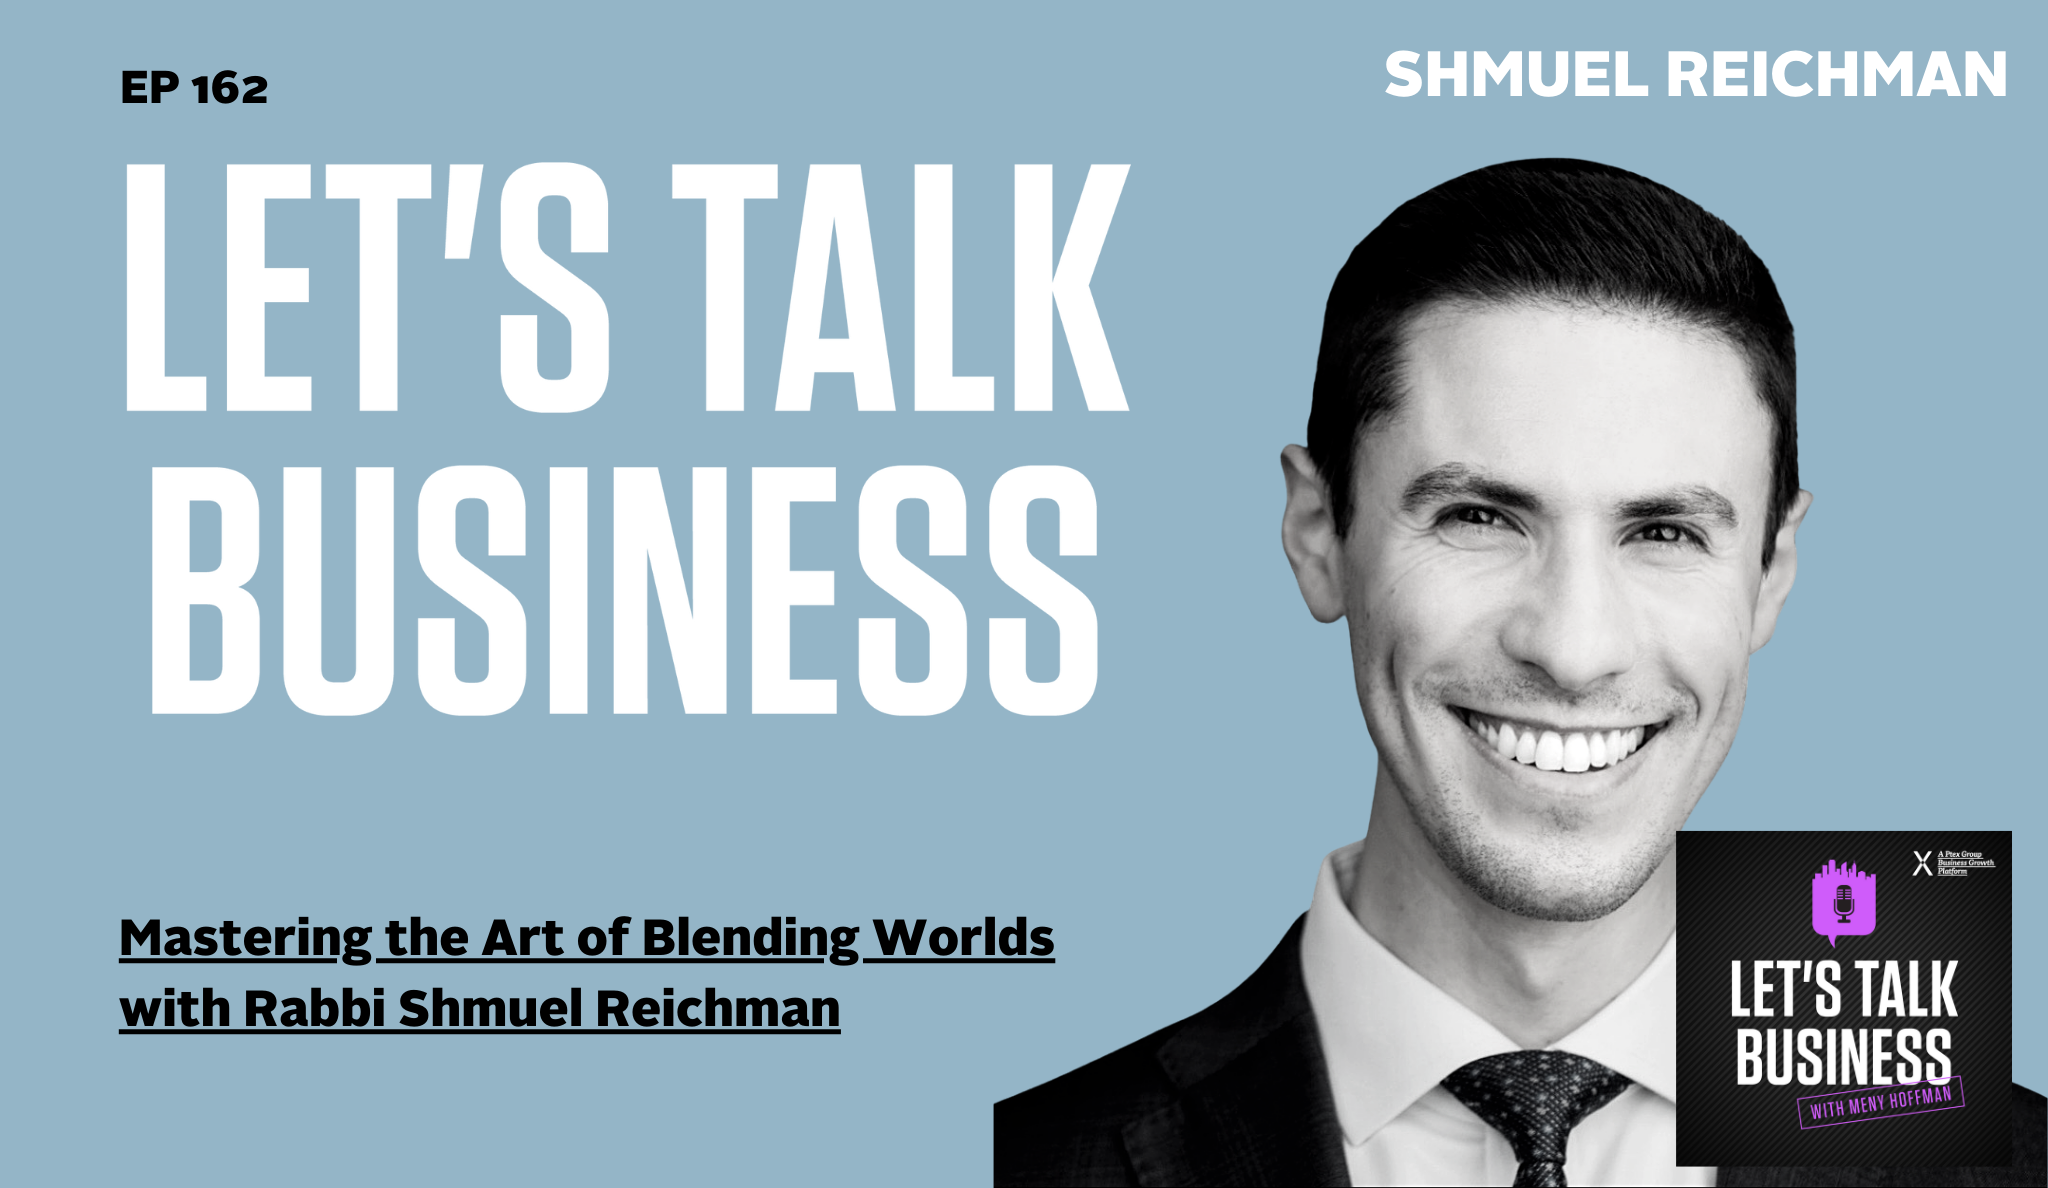 Mastering the Art of Blending Worlds with Rabbi Shmuel Reichman